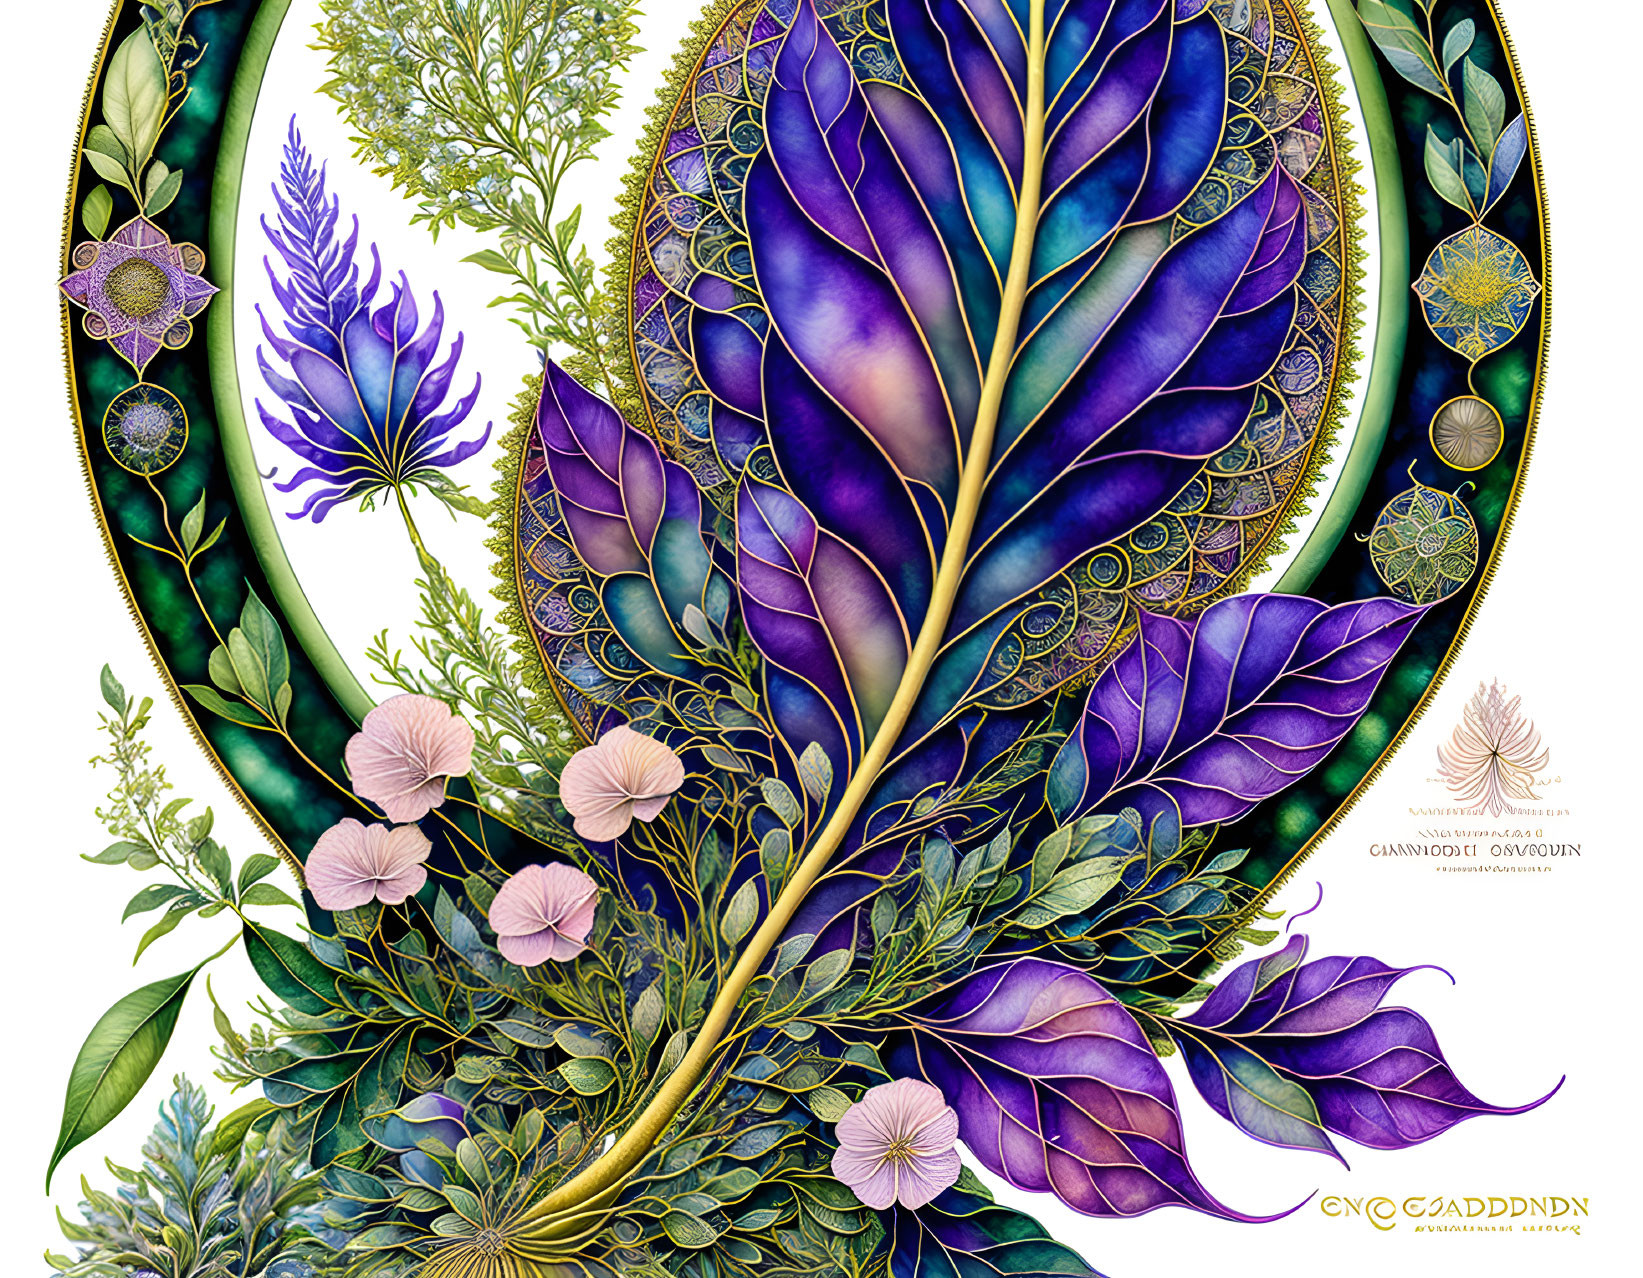 Colorful artwork: Purple leaves and flowers with gold details on light background